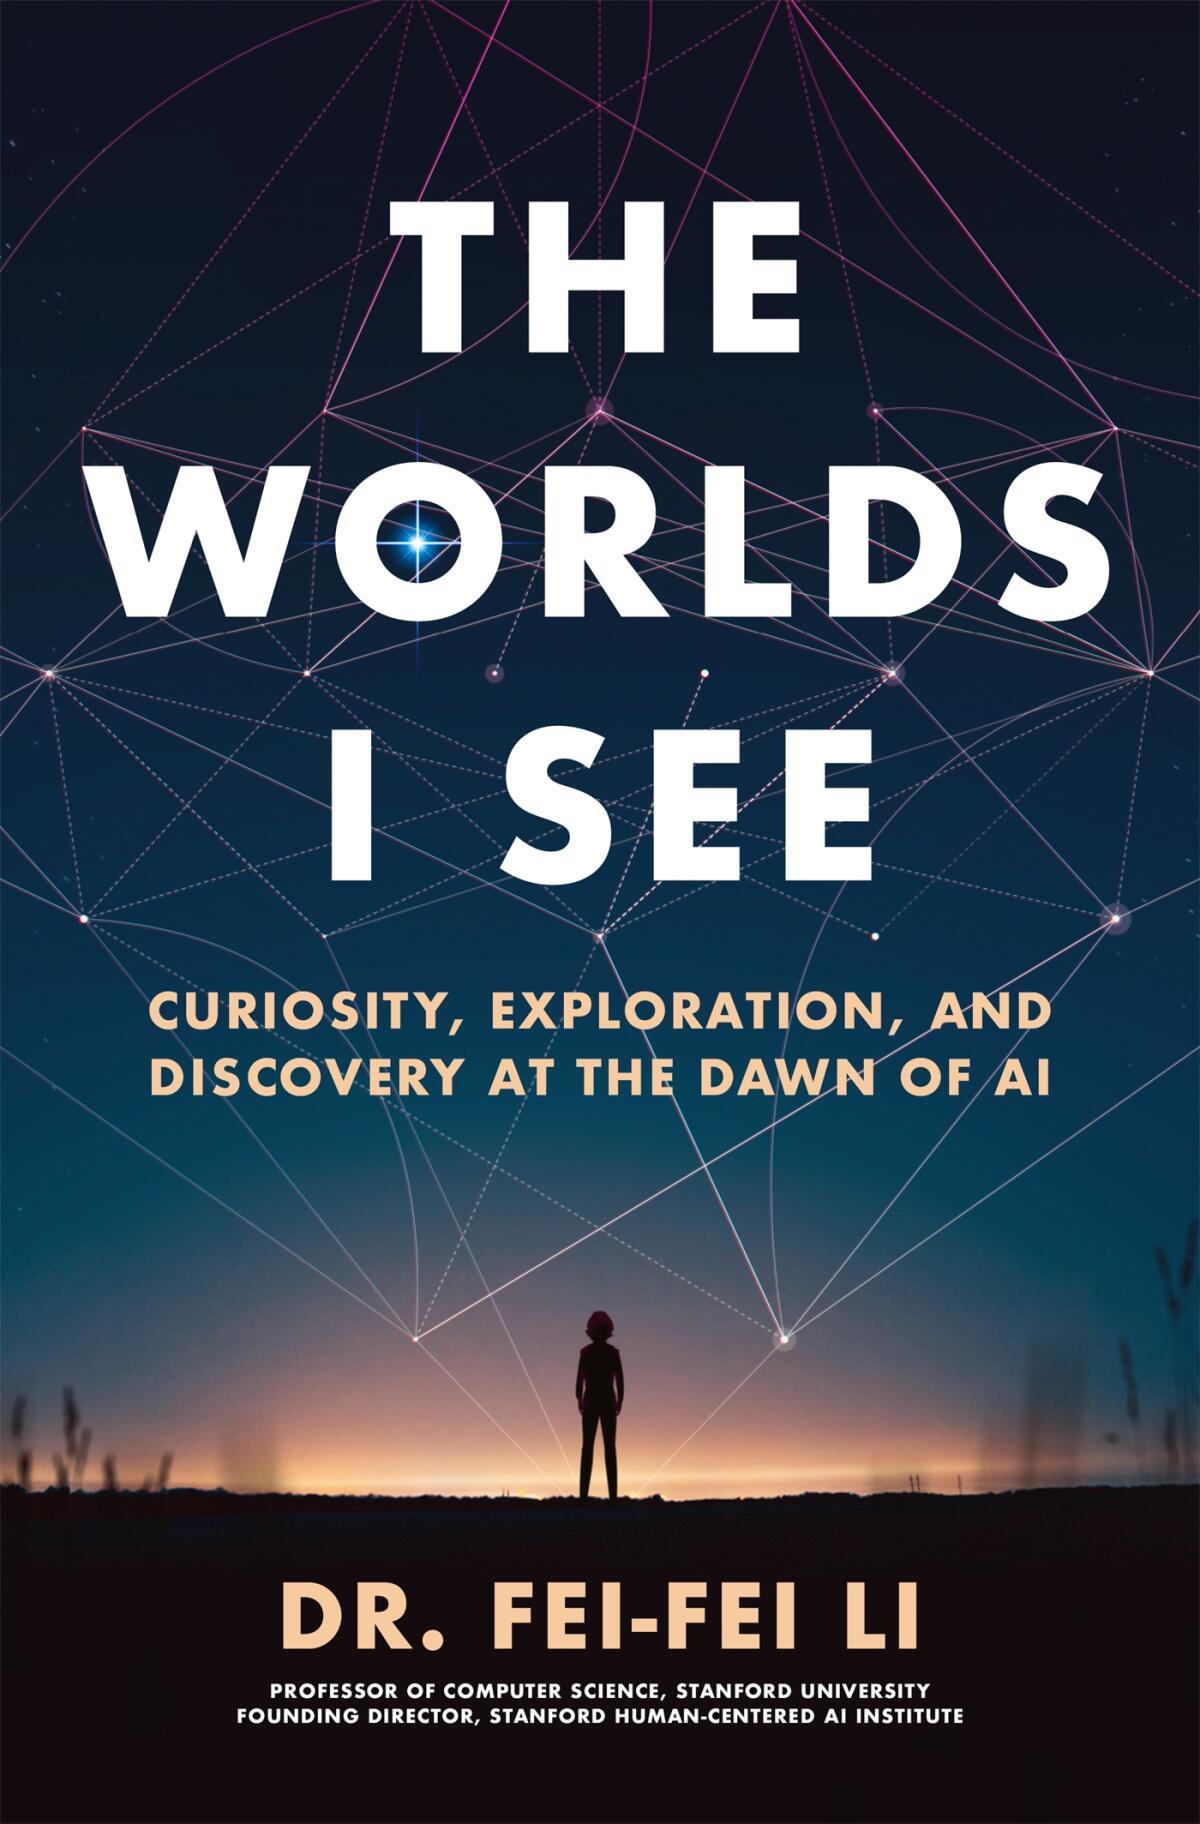 Book cover for "The Worlds I See: Curiosity, Exploration, and Discovery at the Dawn of AI" by Fei-Fei Li.